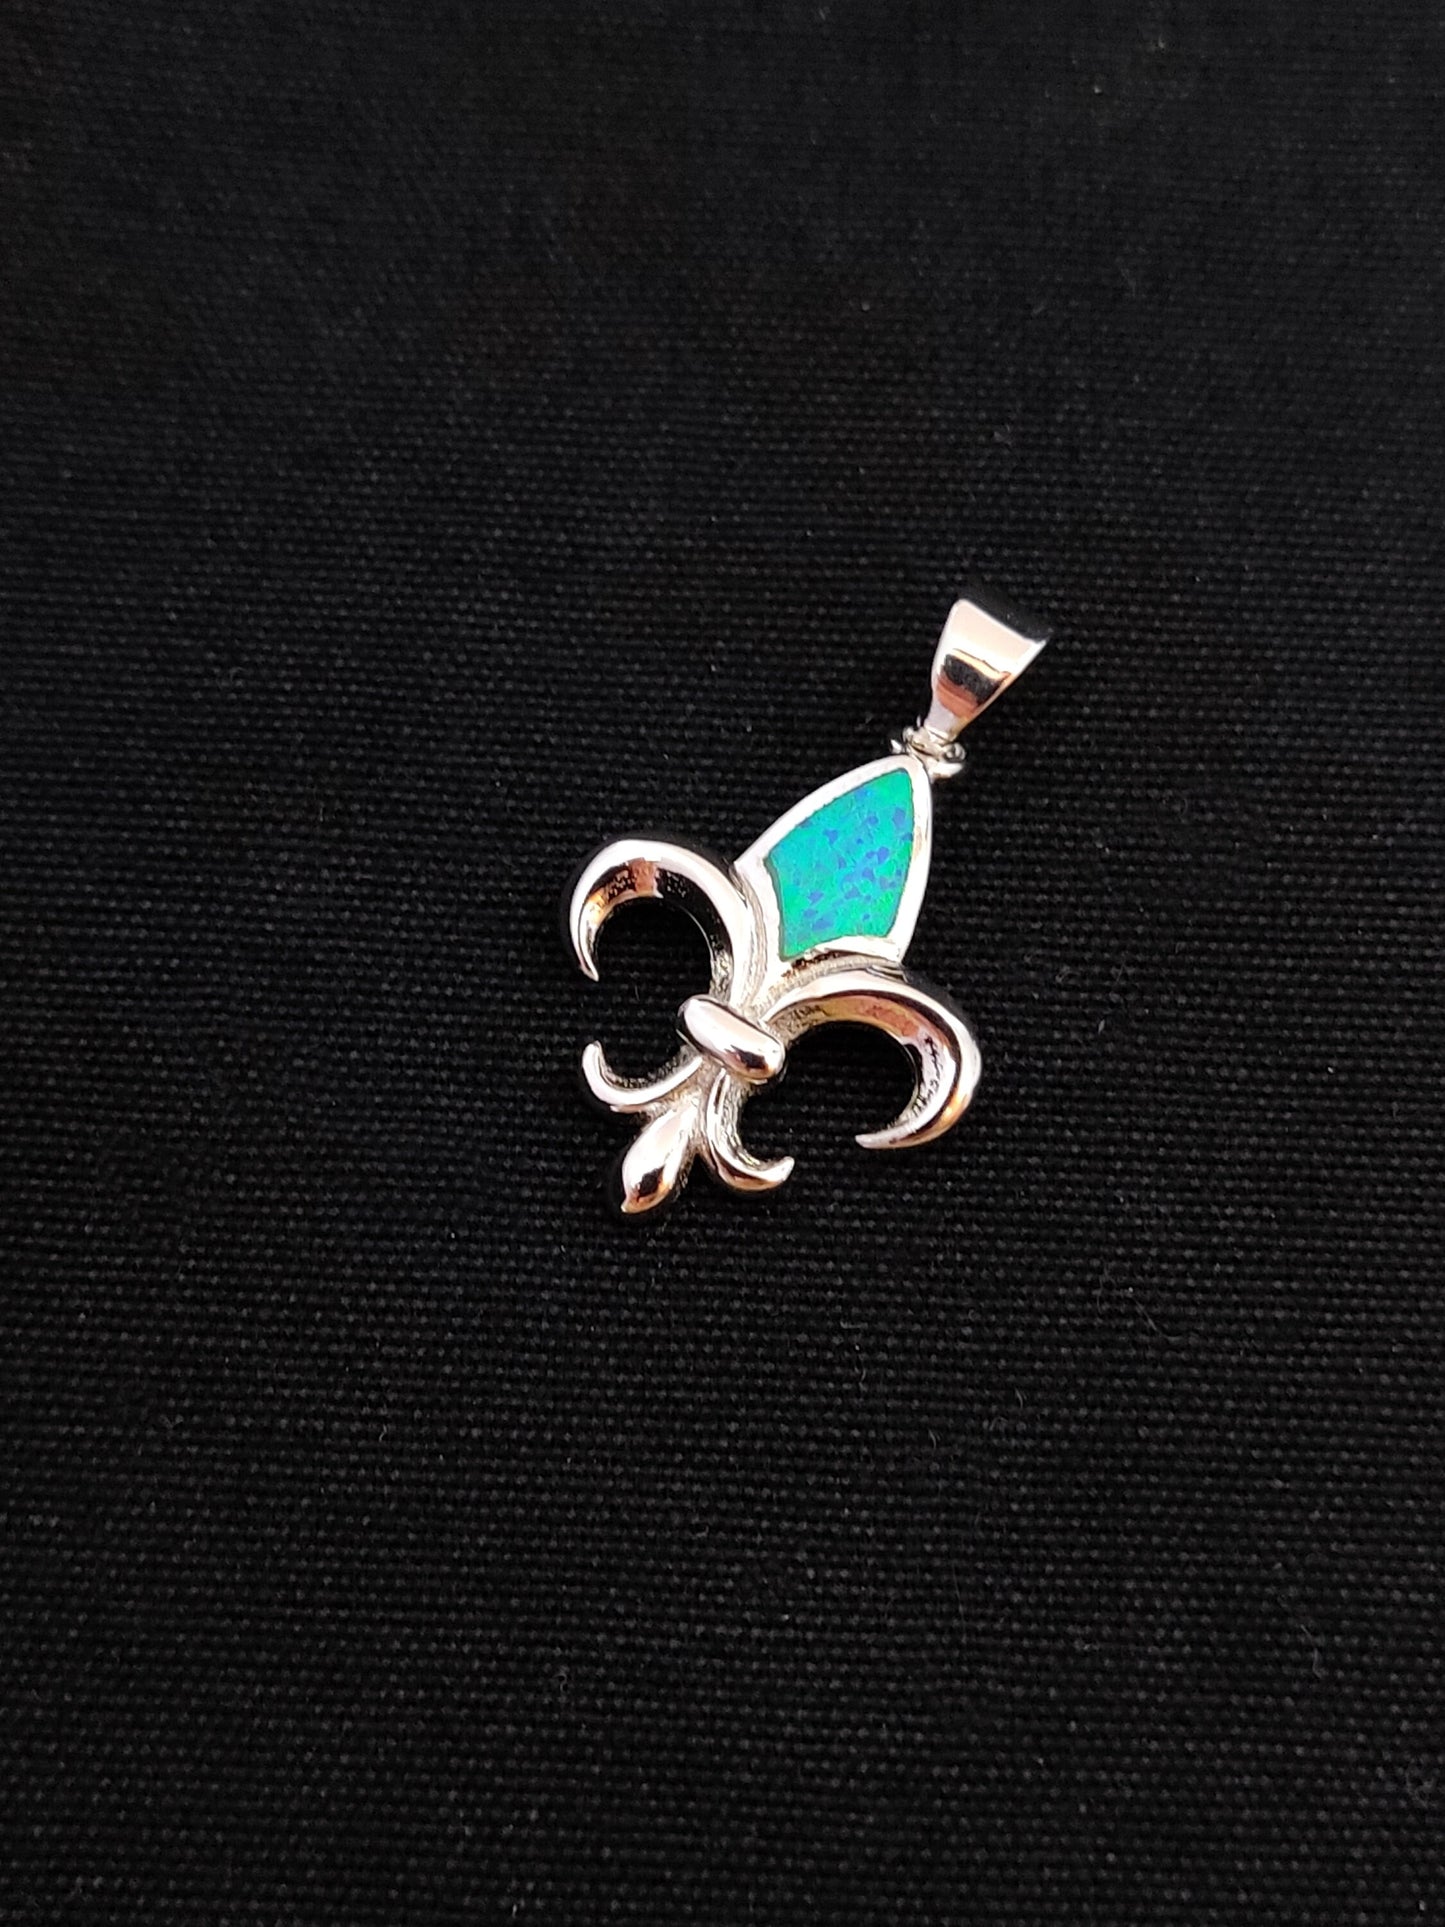 Sterling Silver 925 Blue Opal Fleur-de-lis lys French Lily Knight Pendant, Opal Lily Pendant, French Jewelry, Griechischer Opal Anhanger,